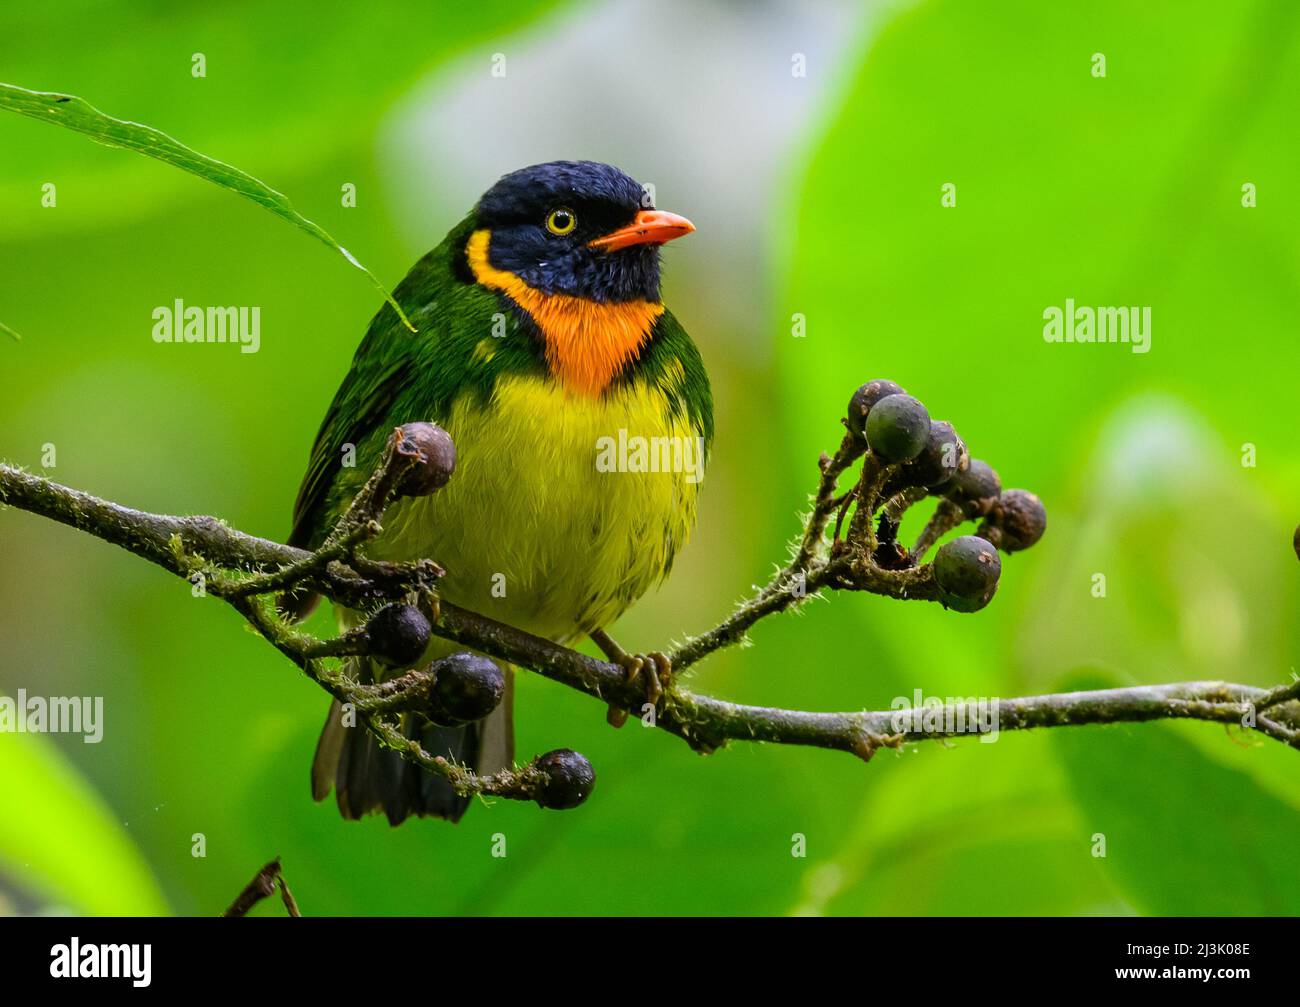 A male Orange-breasted Fruiteater (Pipreola jucunda) perched on a branch. Colombia, South America. Stock Photo